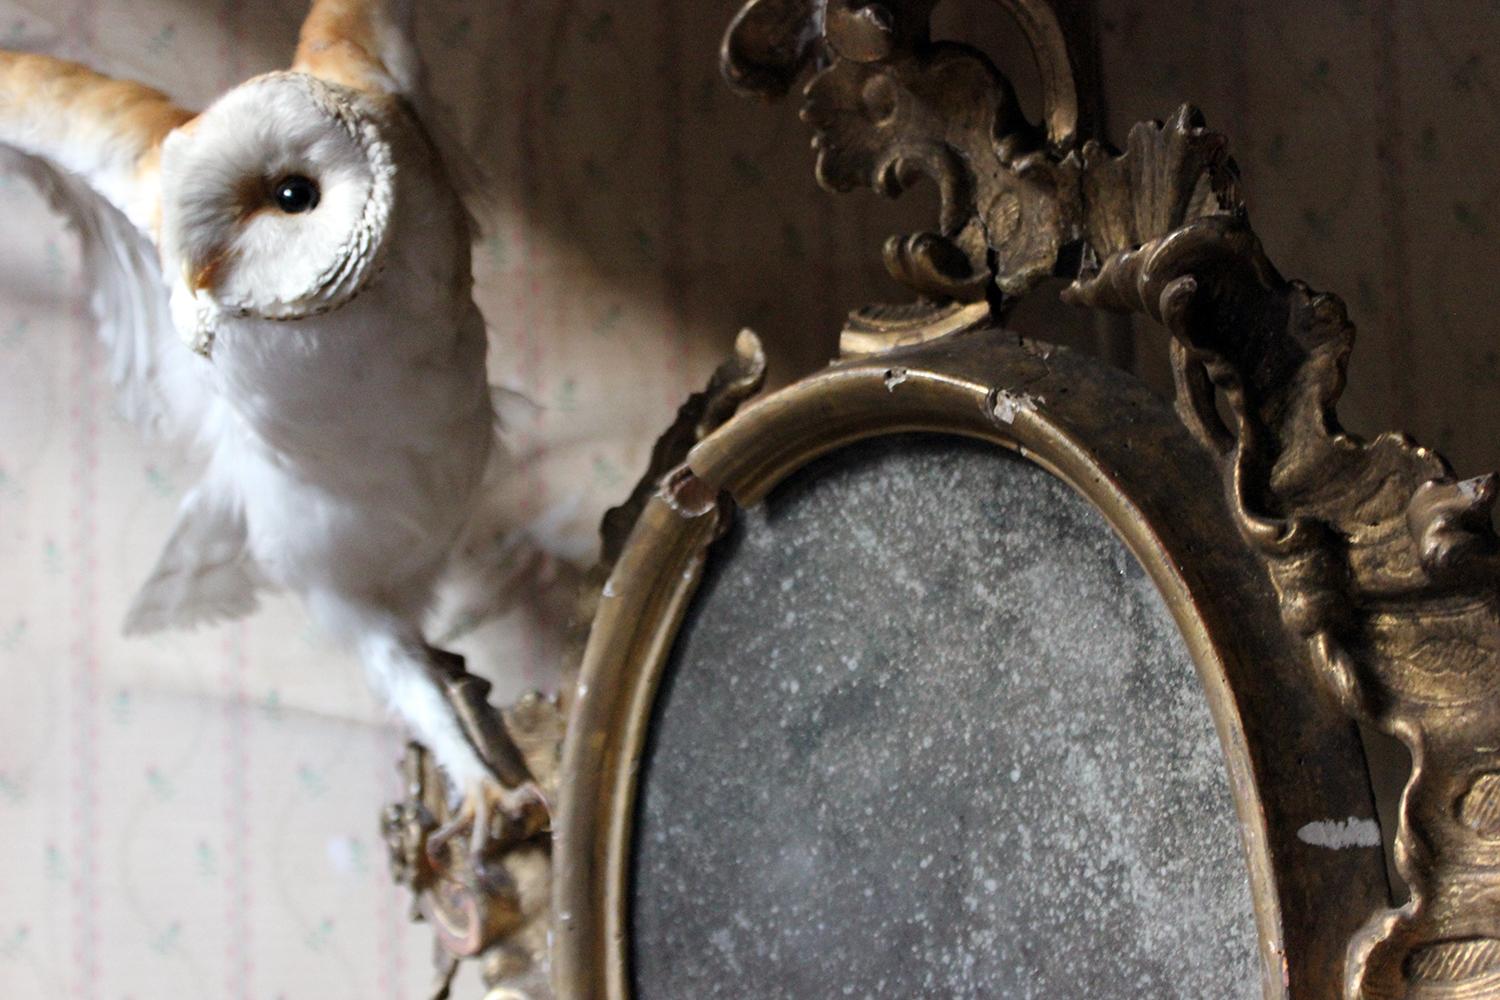 The large and fine stuffed and mounted barn owl (Tyto alba) specimen, spread-eagled amidst take-off from a Georgian period Rococo gilded gesso architectural fragment with foxed mirror plate, distressed, the whole a sculptural concoction surviving